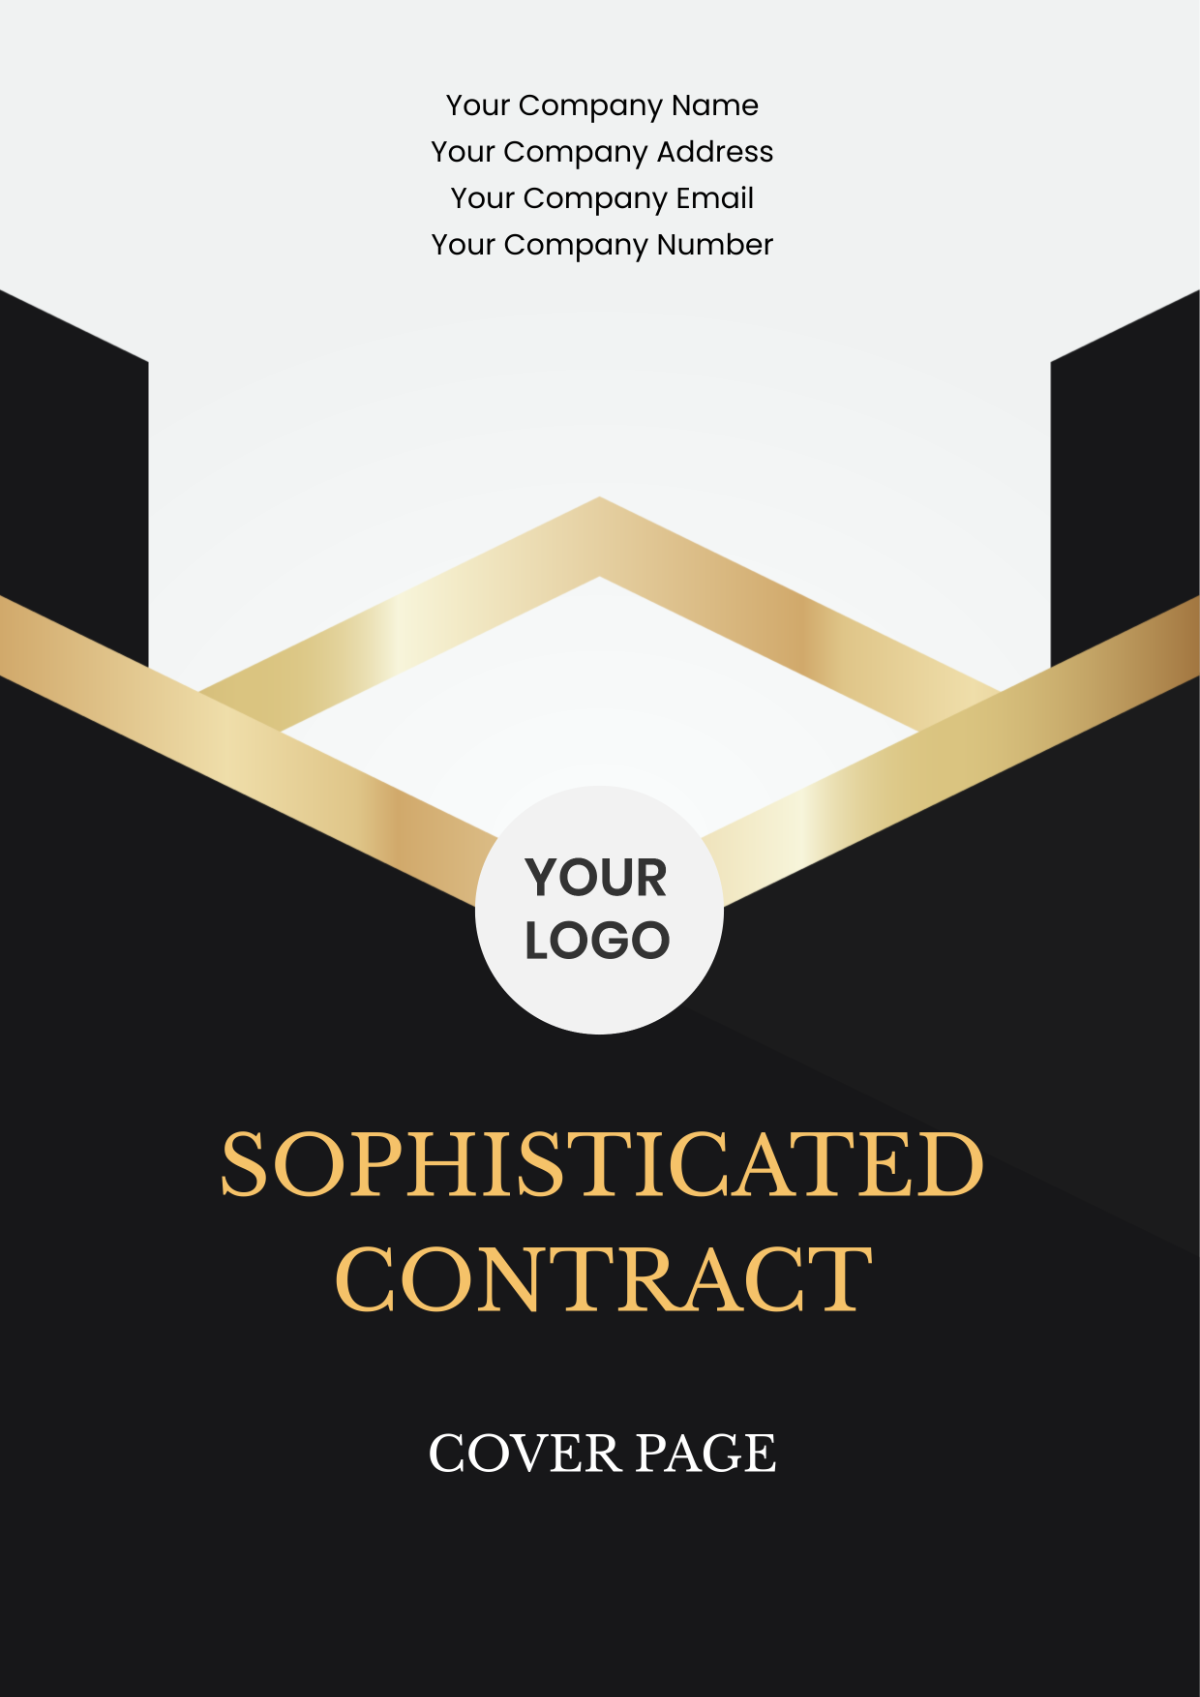 Sophisticated Contract Cover Page